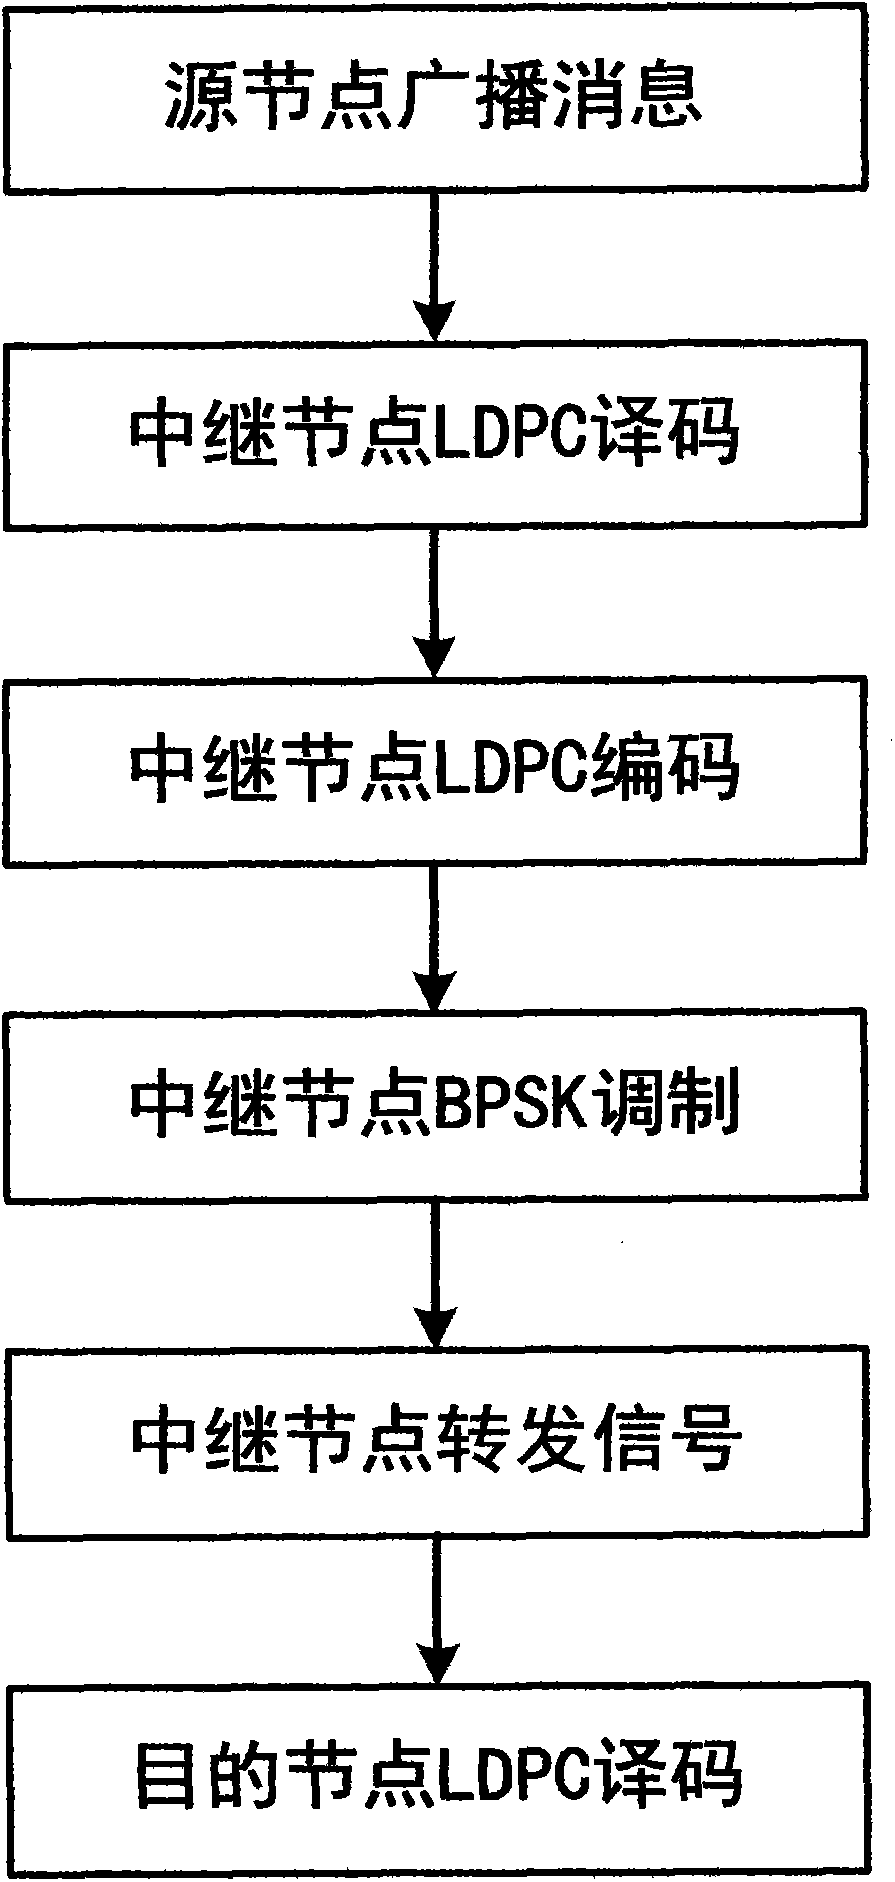 Double-layer lengthened LDPC (Low Density Parity Check) code-based relay transmission method